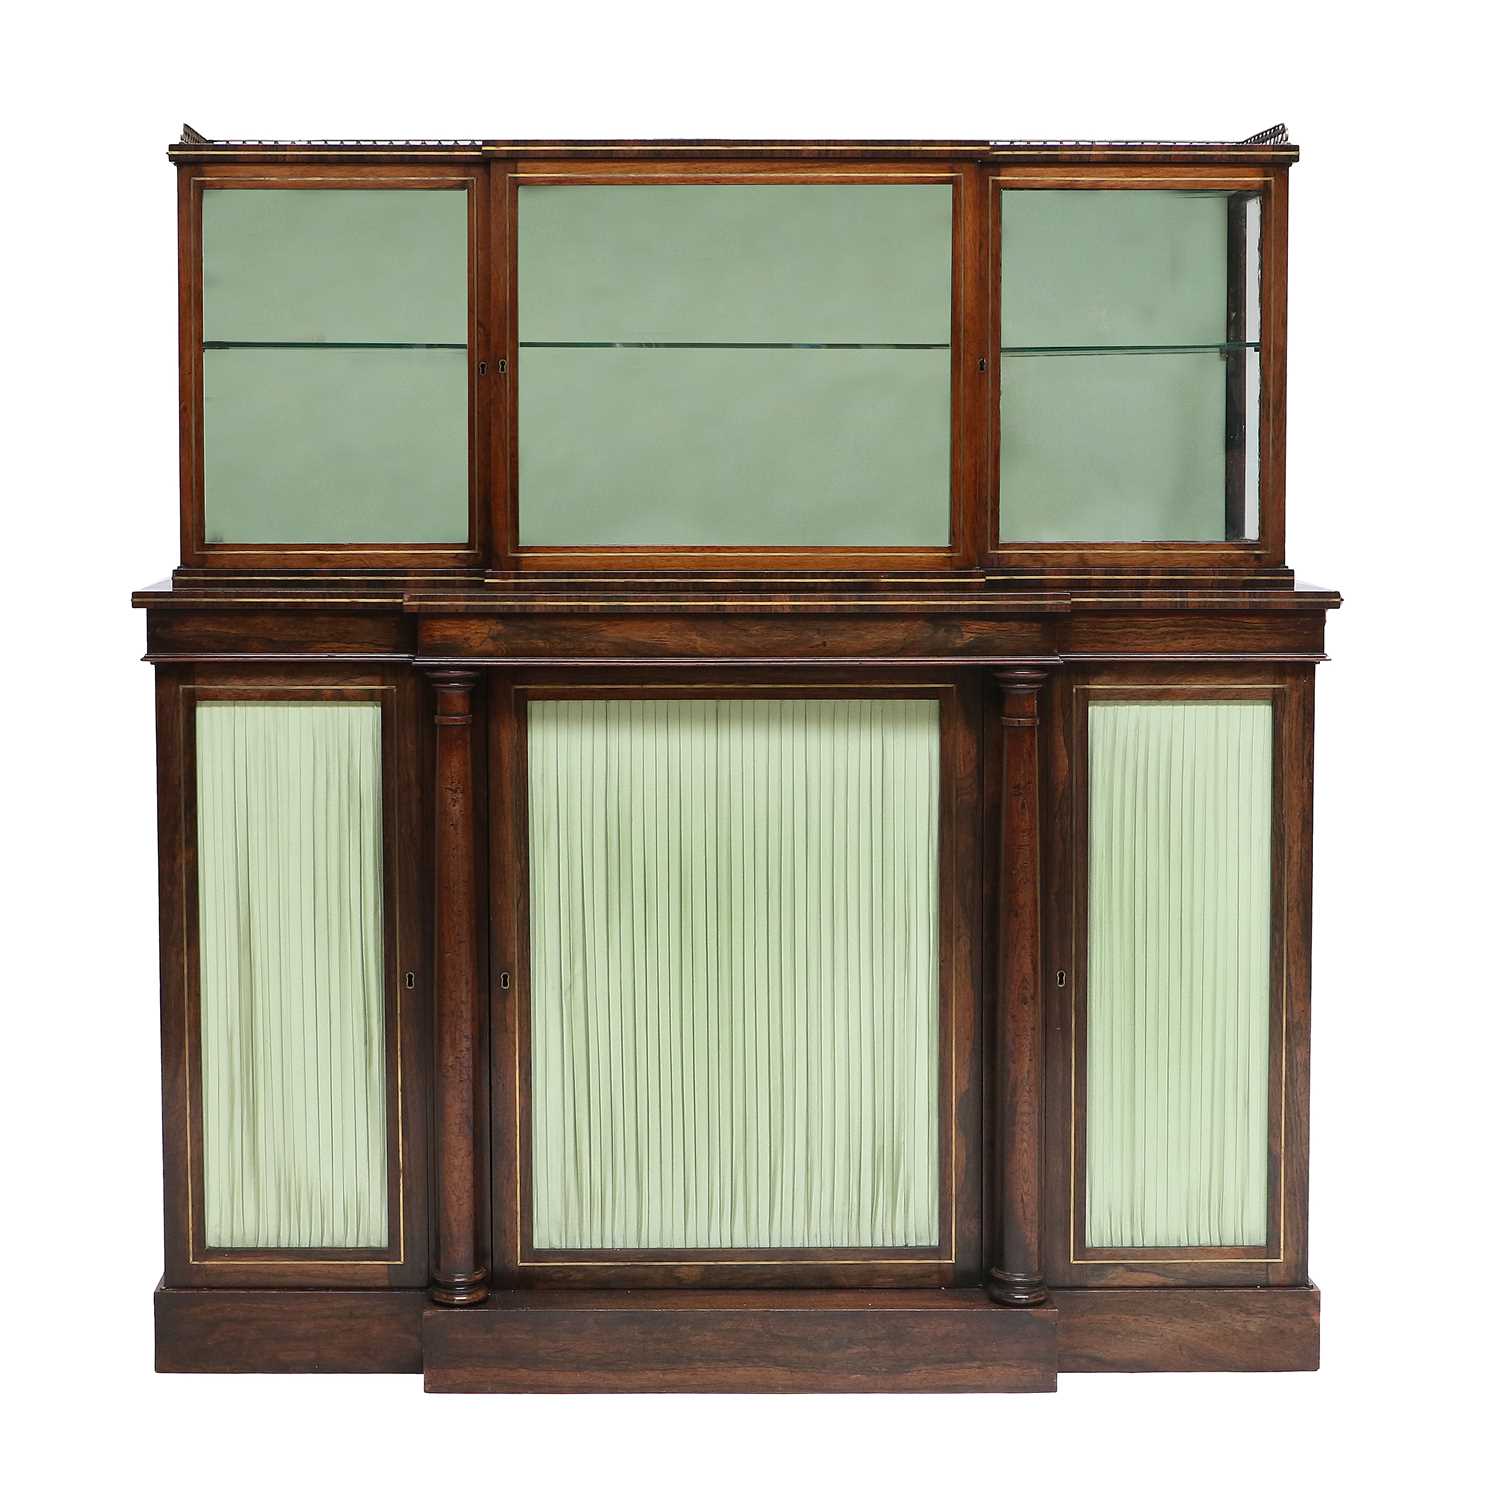 A Regency Rosewood and Brass-Inlaid Breakfront Chiffonier, early 19th century, the upper section